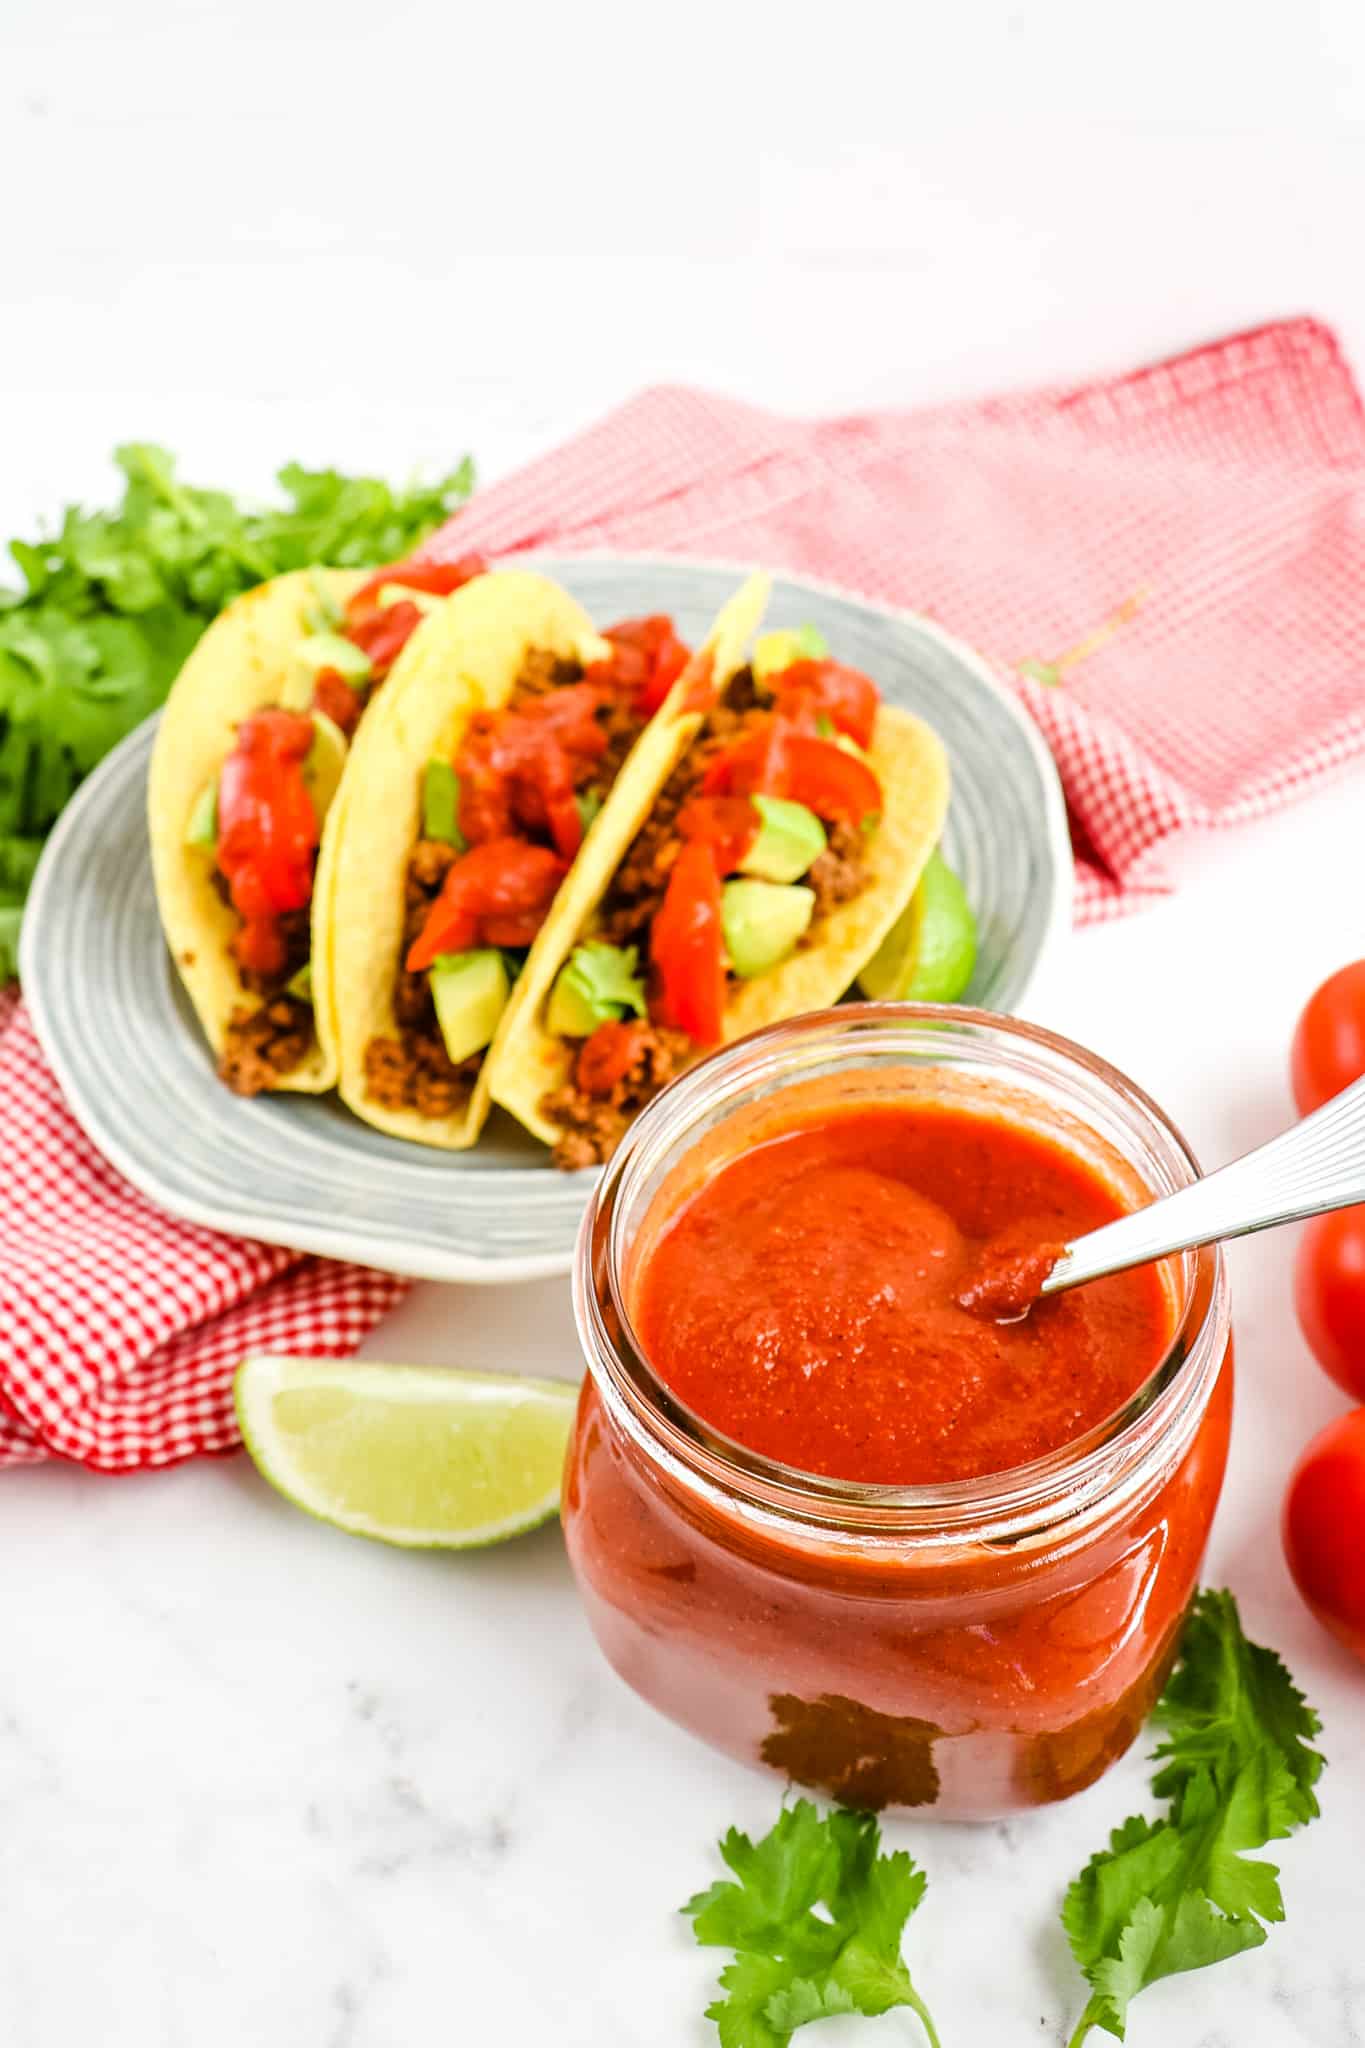 Homemade taco sauce in jar, with plate of tacos in background.